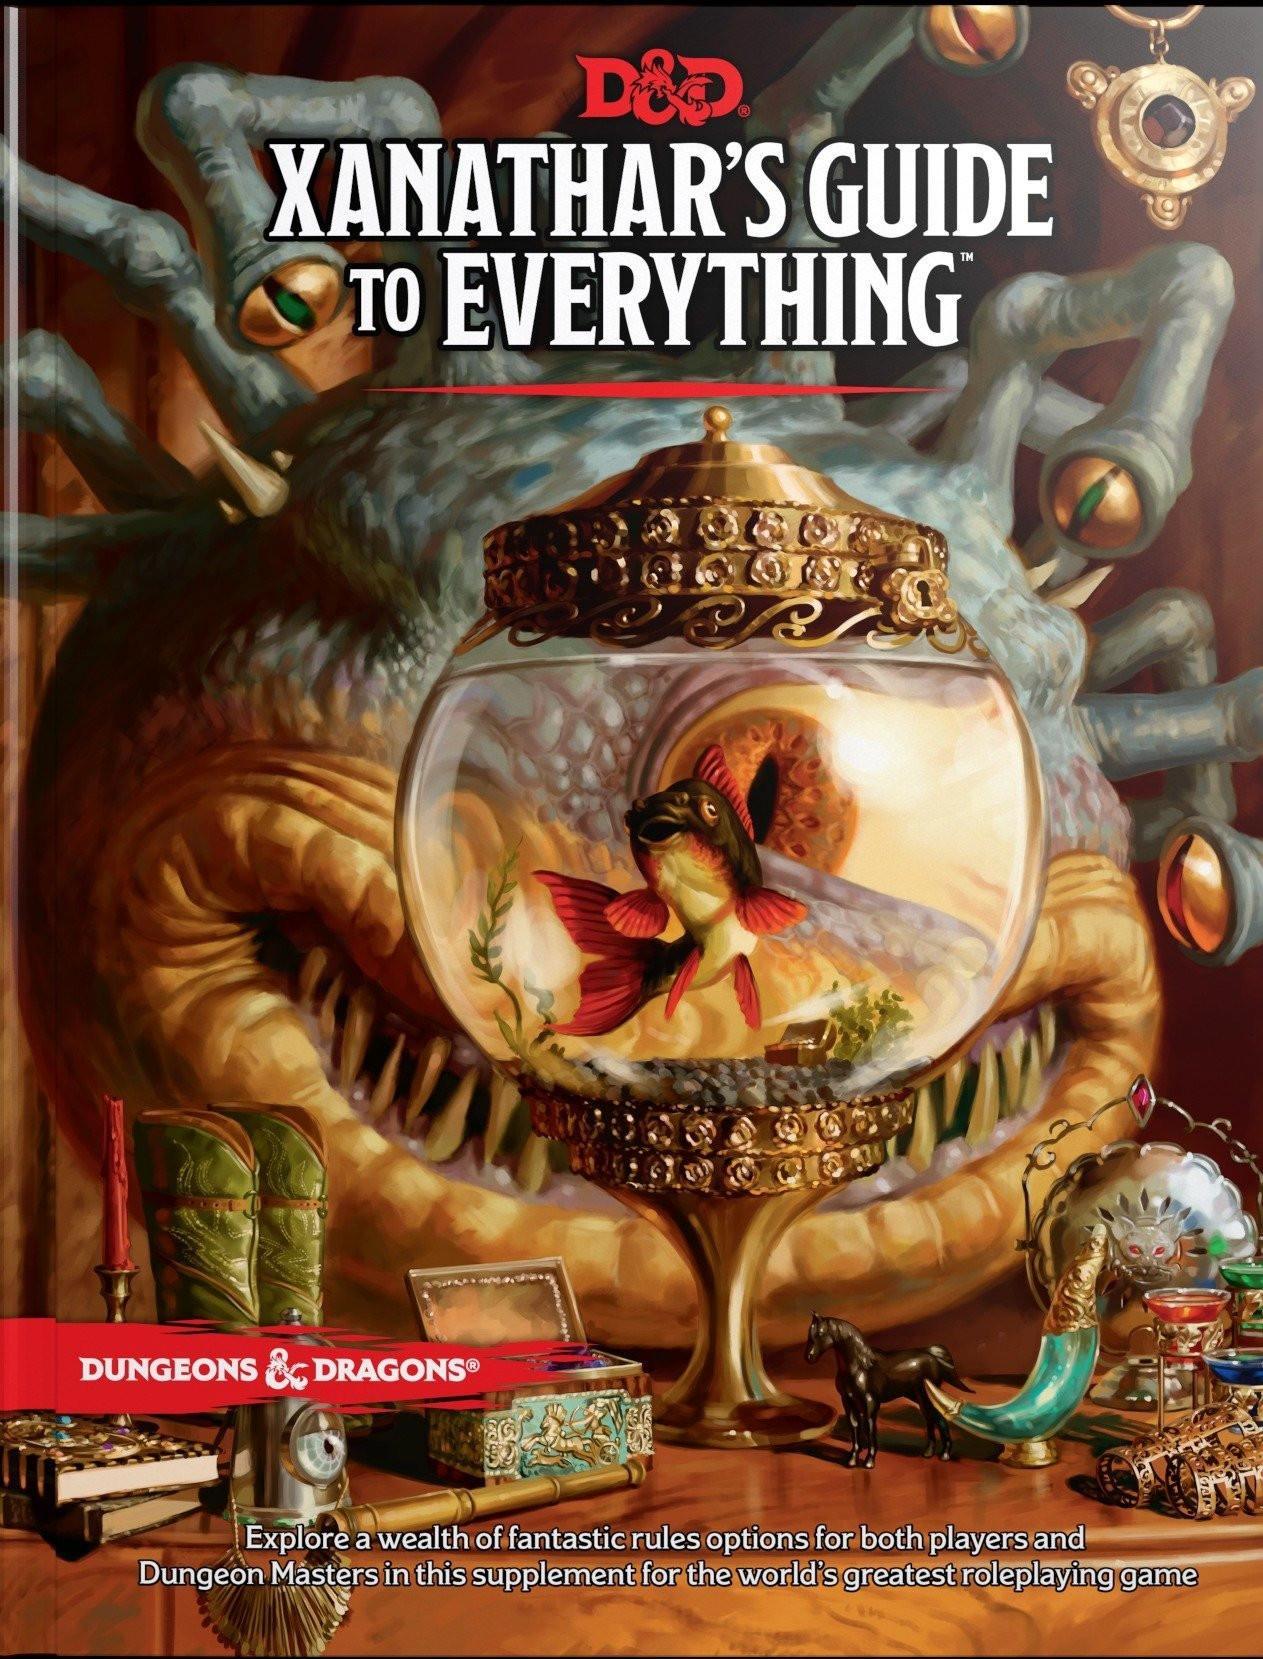 VR-87473 D&D Dungeons & Dragons Xanathars Guide to Everything Hardcover - Wizards of the Coast - Titan Pop Culture